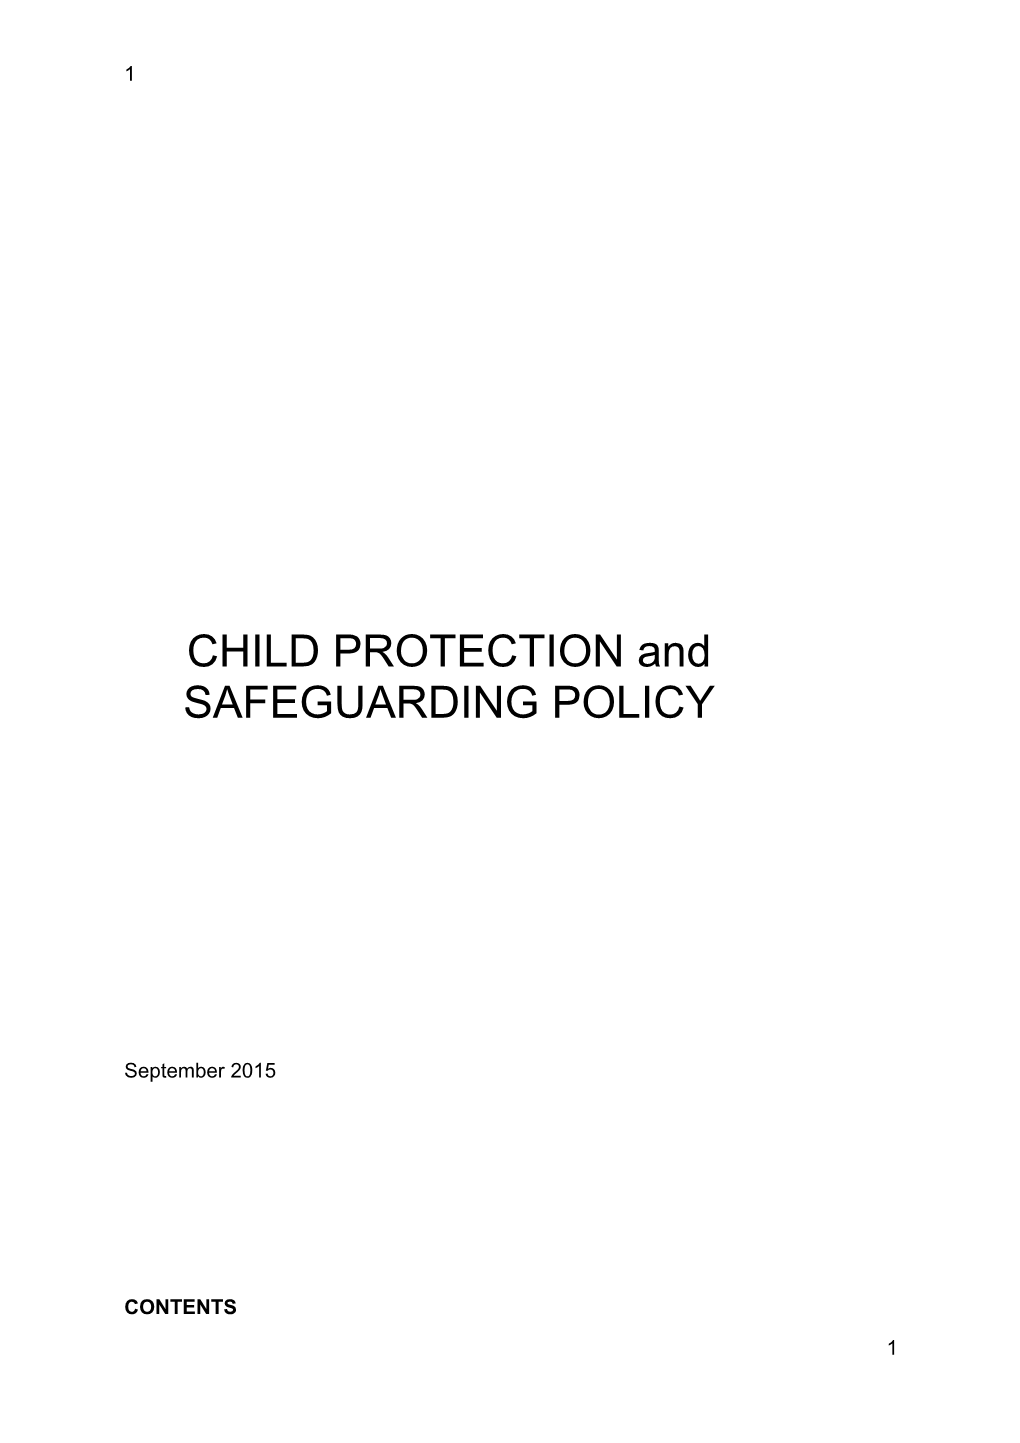 CHILD PROTECTION And s1